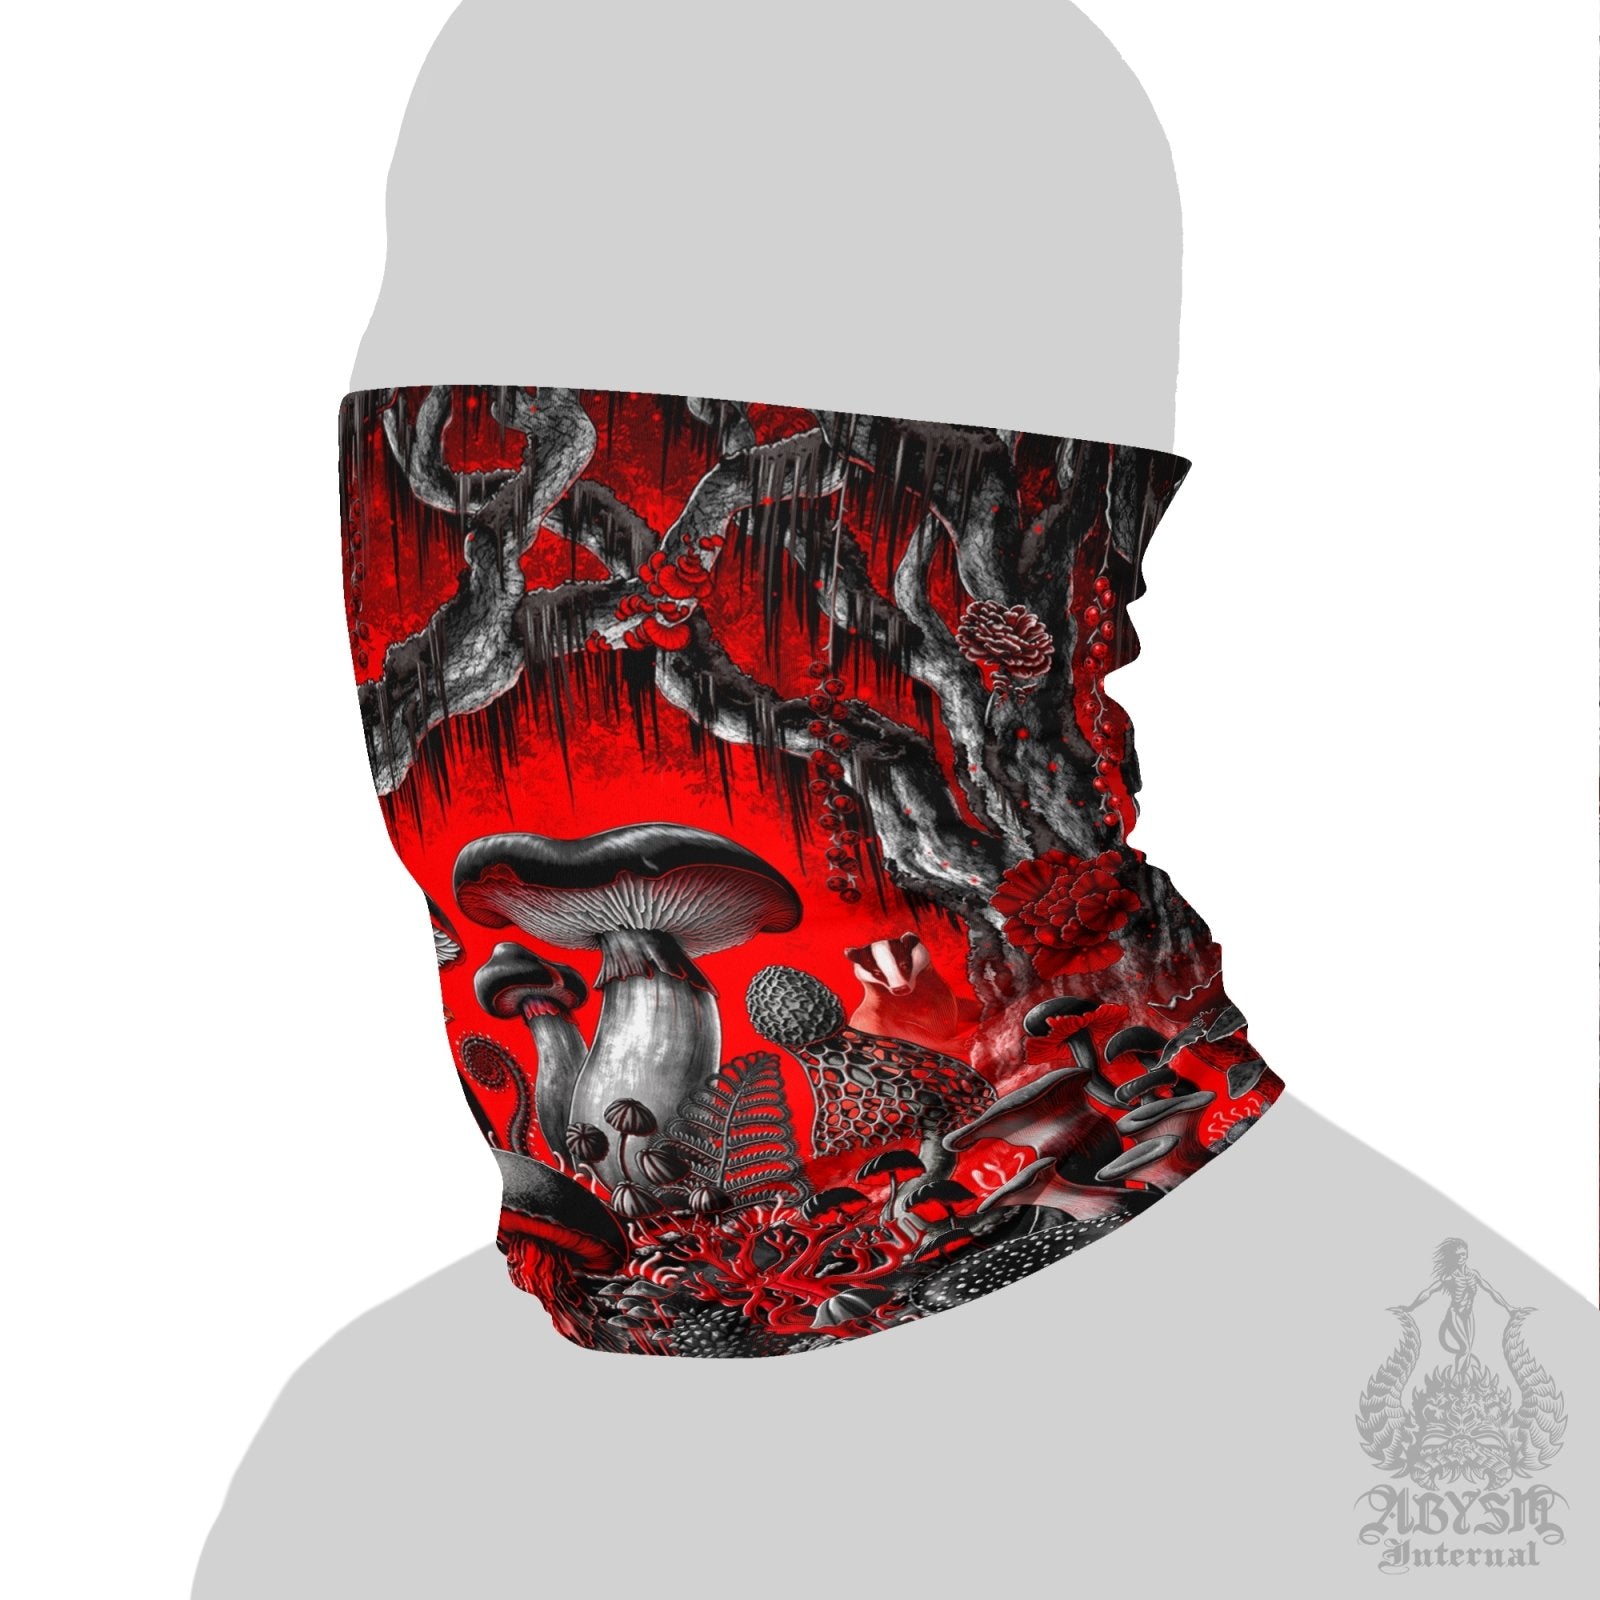 Gothic Mushrooms Neck Gaiter, Bloody Goth Face Mask, Head Covering, Magic Shrooms Art, Indie Festival Outfit, Mycologyst Gift - Vampiric Red - Abysm Internal